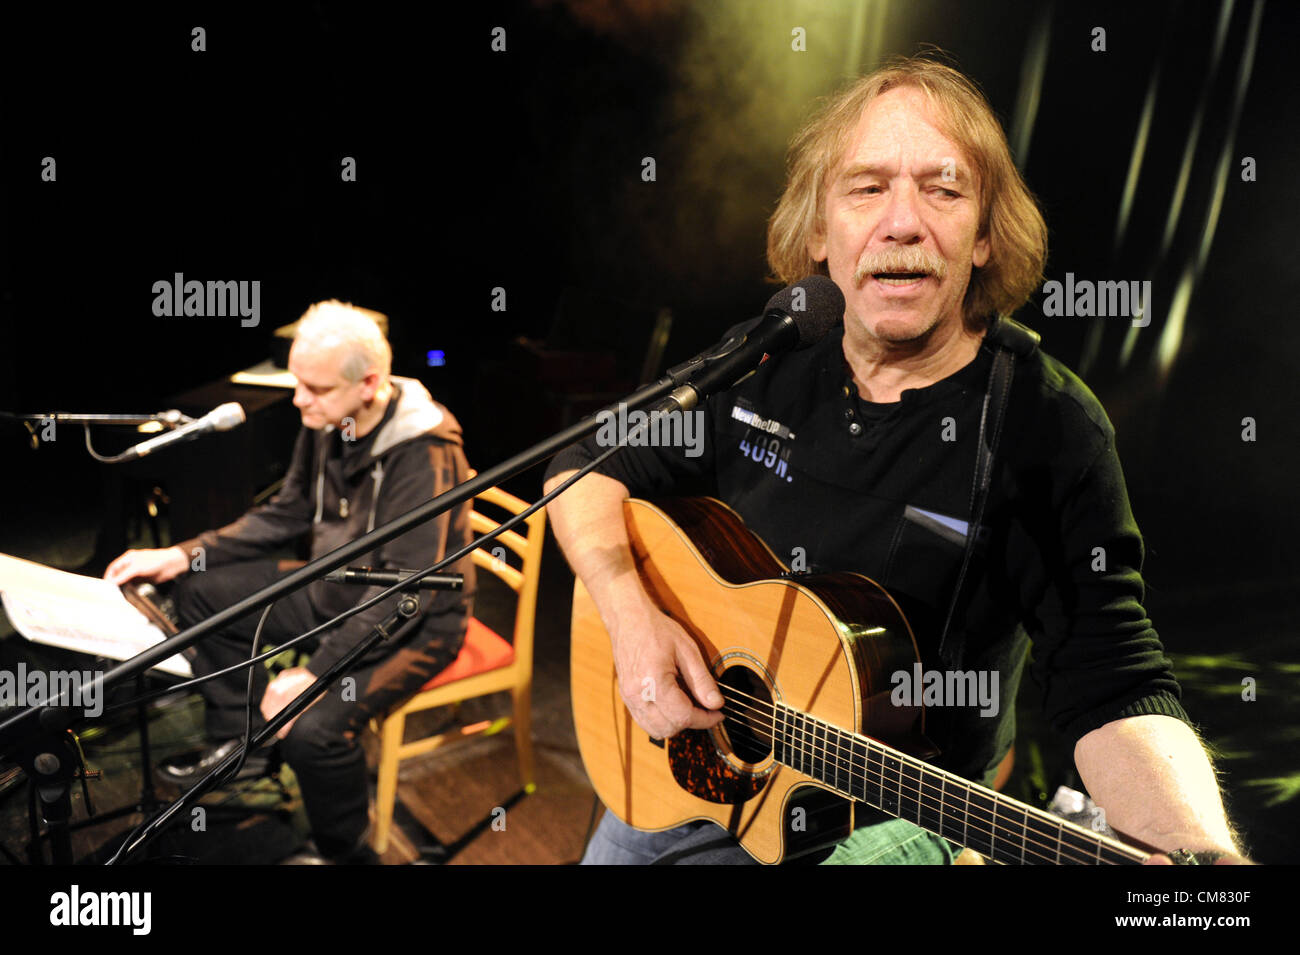 Czech singer and songwriter Jaromir Nohavica (right) and German singer and  songwriter Frank Viehweg (left) perform during the opening evening of 14th  festival of music, literature and theater Days of Czech, German